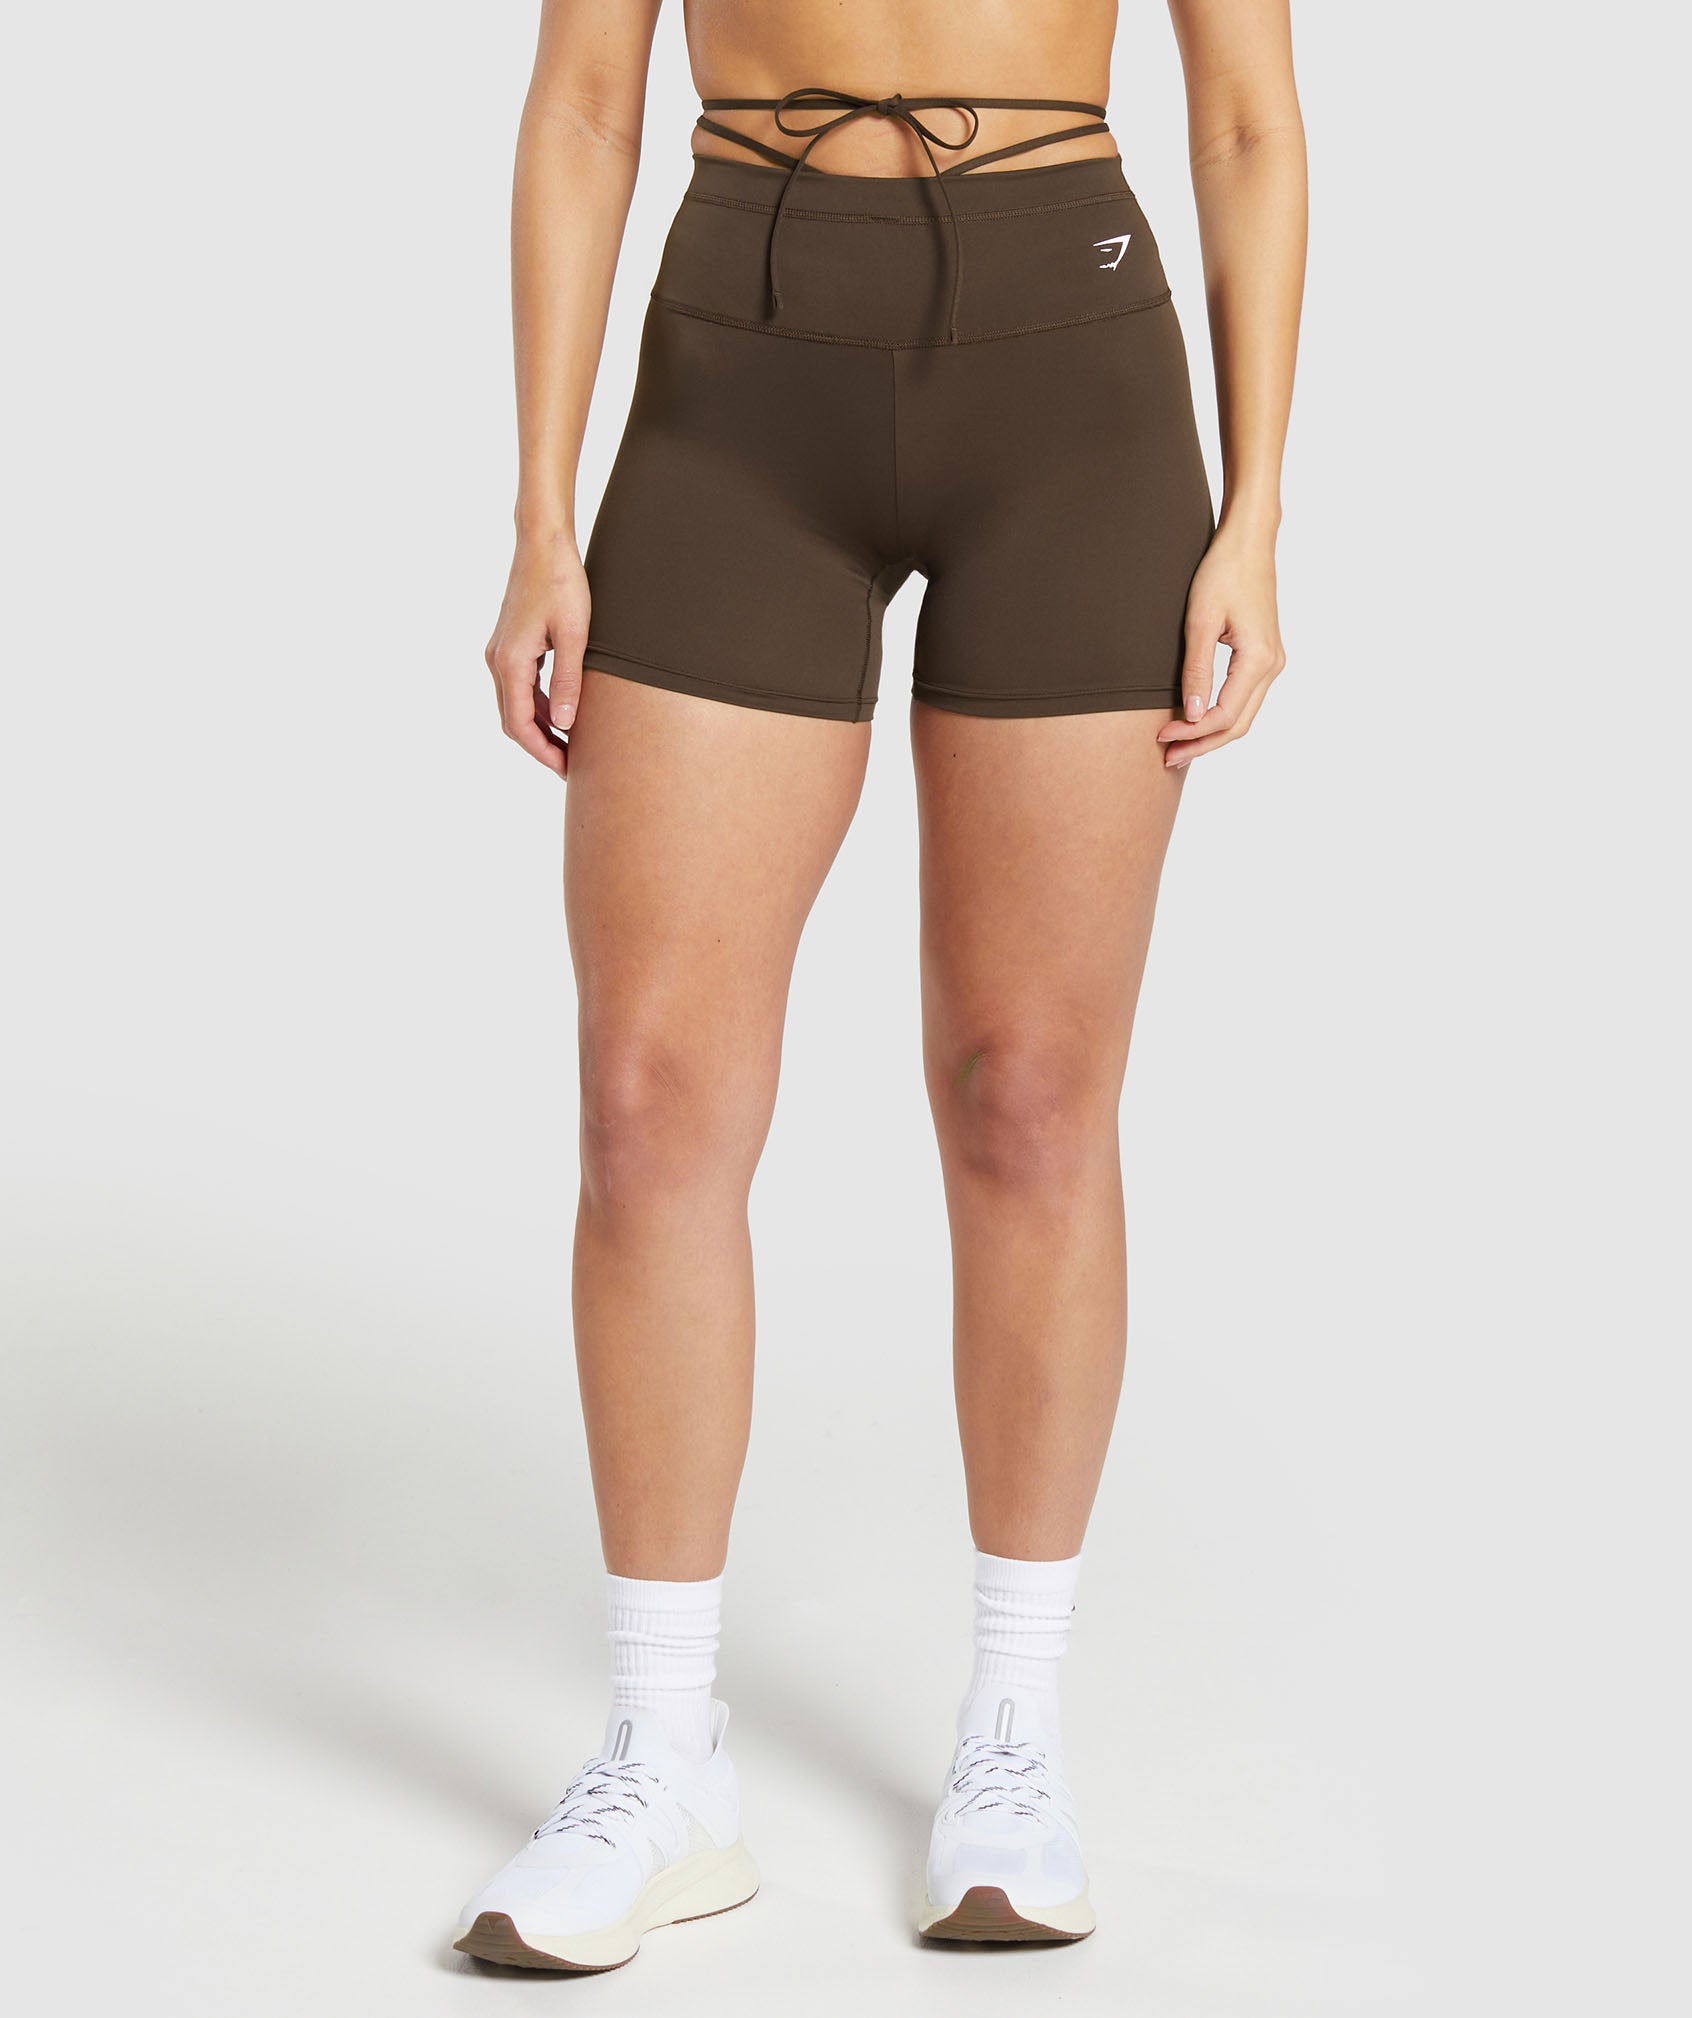 Ribbon Tie Waisted Shorts in Archive Brown